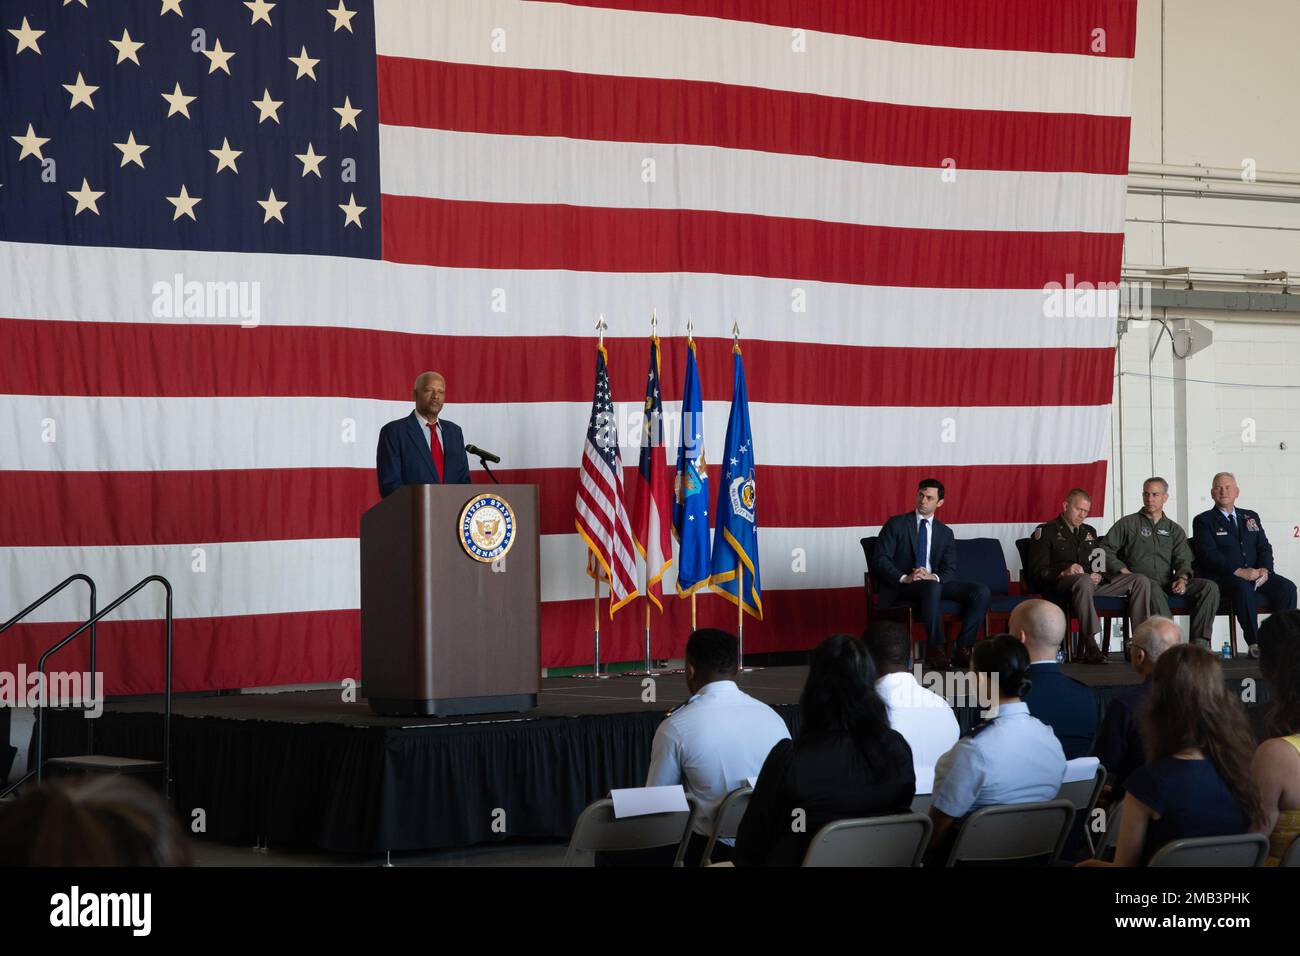 Rep. Hank Johnson speaks during Academy Day at Dobbins Air Reserve Base, Ga, June 11. 2022. Sen. Jon Ossoff and Rep. Hank Johnson  hosted the 2022 Academy Day at Dobbins. High school students met with congressional staffers to learn their service academy nomination process and spoke with representatives from West Point, Naval Academy, Air Force Academy, Coast Guard Academy, Merchant Marine Academy, and other military accessioning sources throughout the morning. Stock Photo